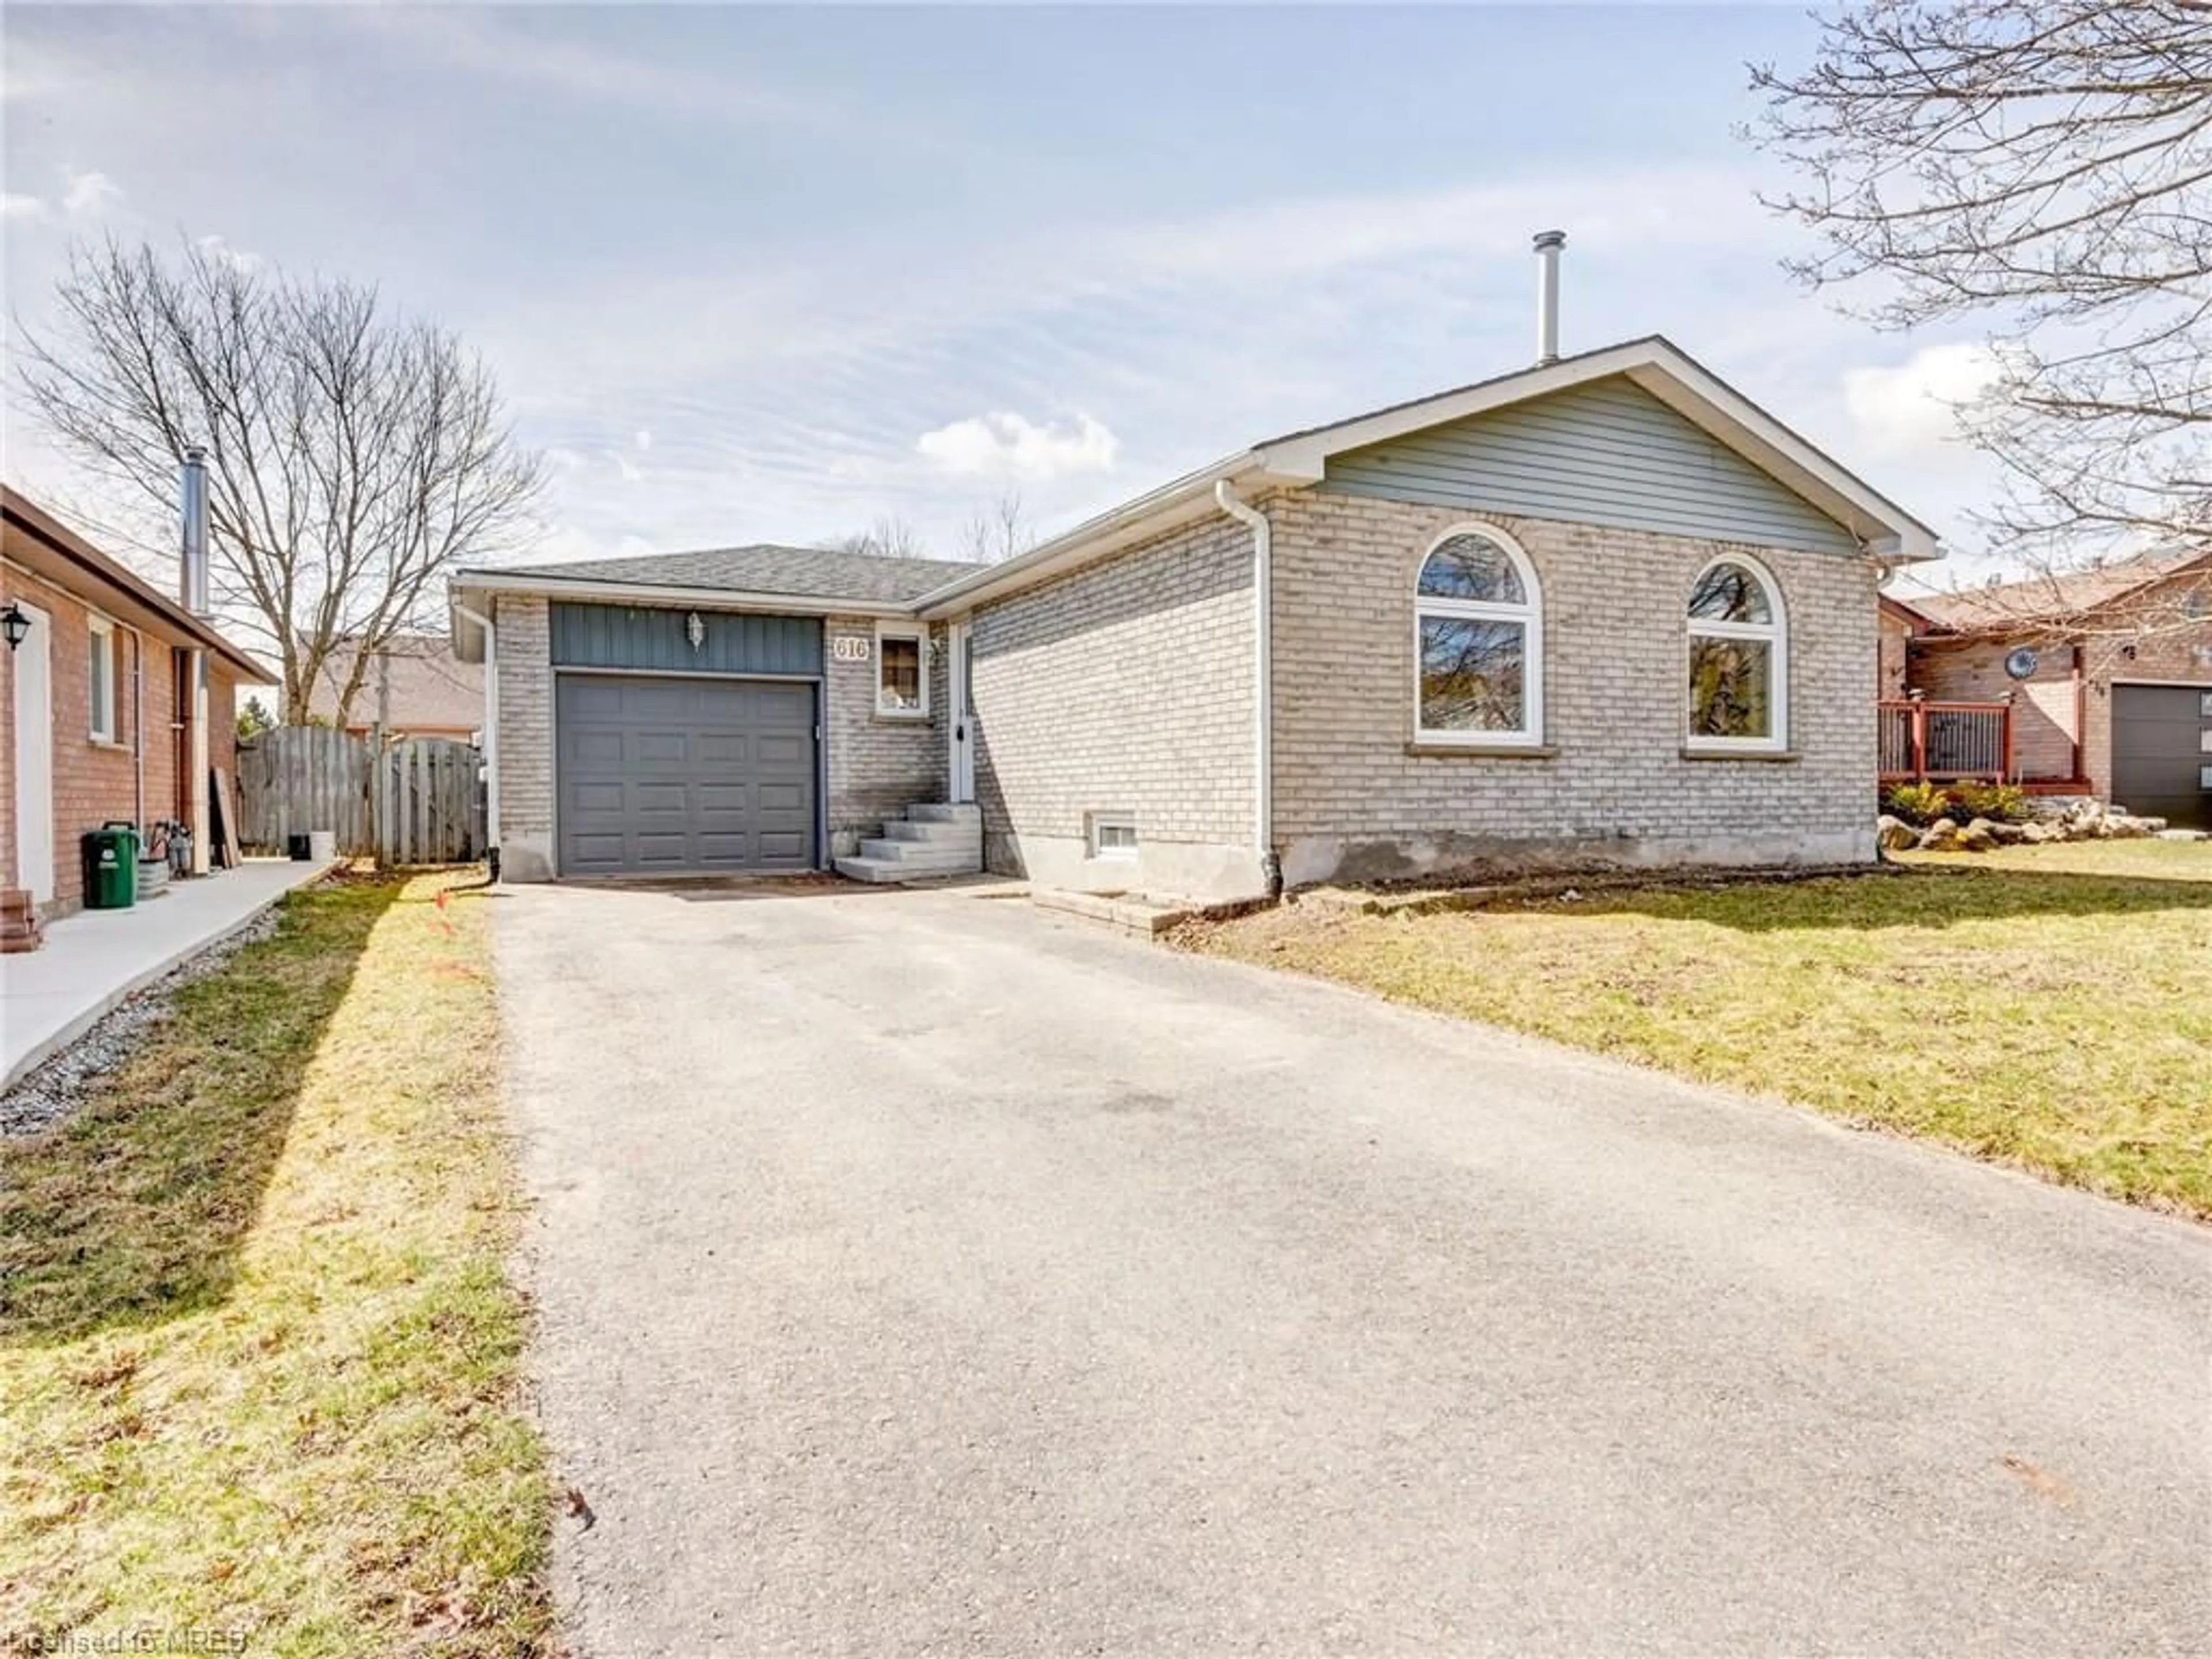 Frontside or backside of a home for 616 Canfield Pl, Shelburne Ontario L9V 3A5